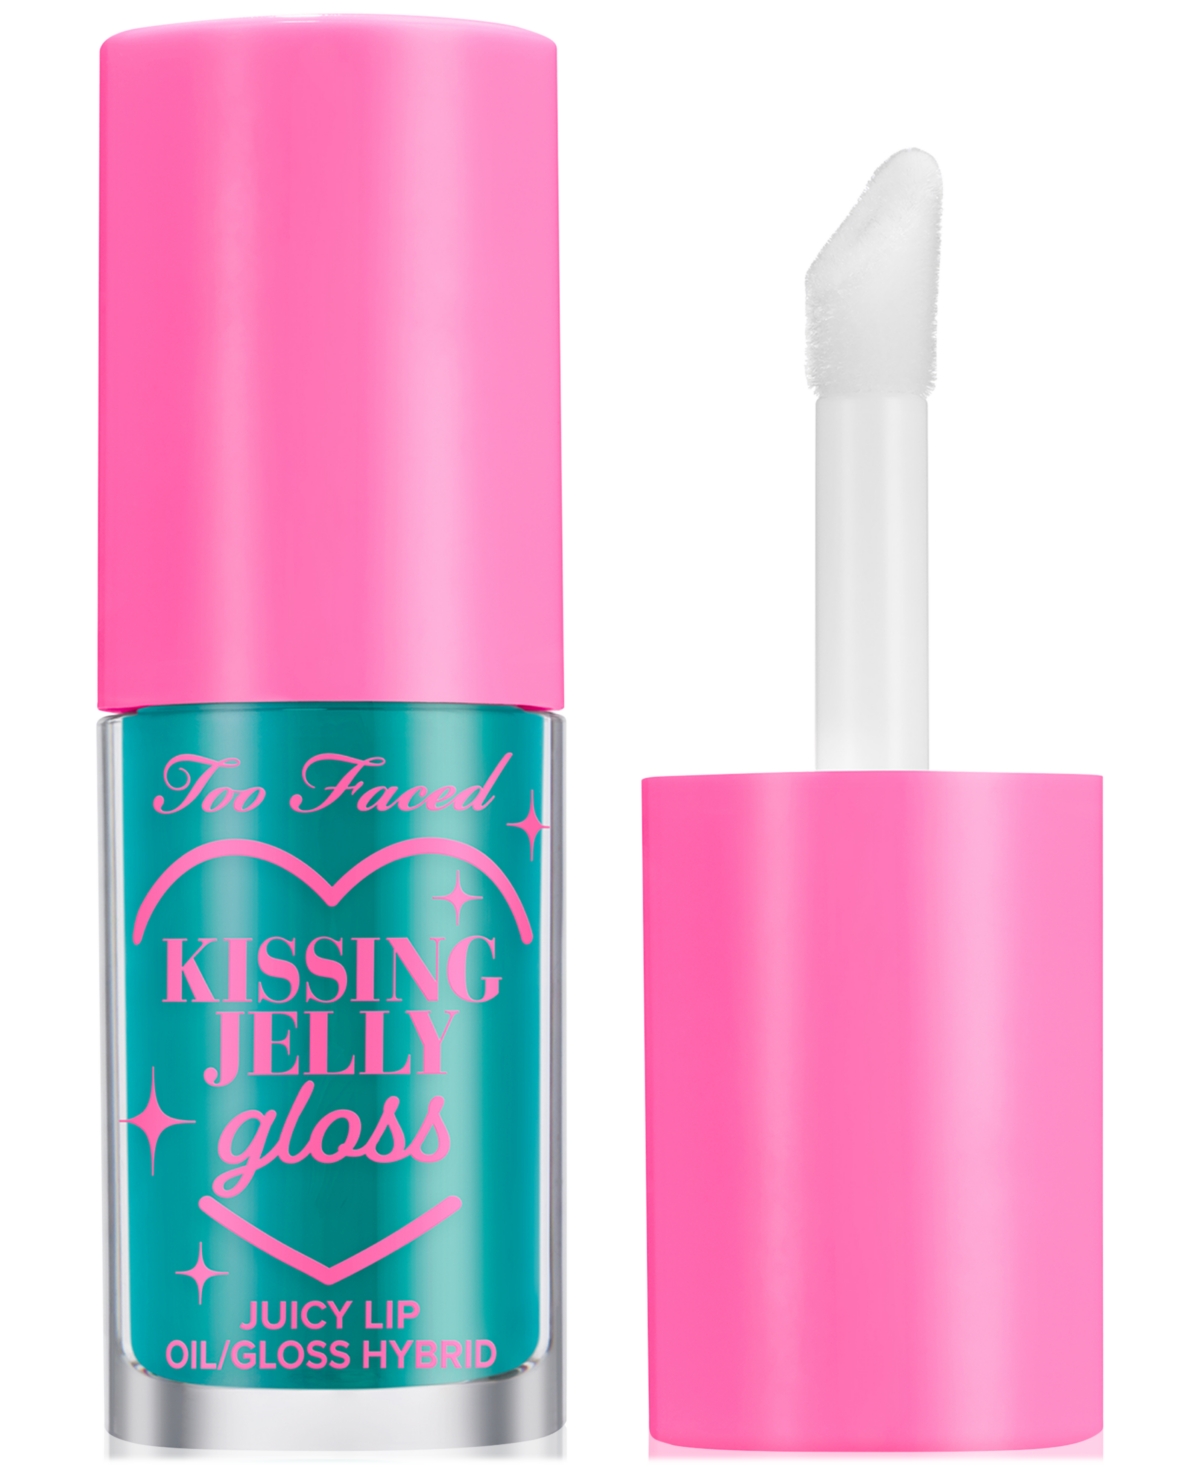 Too Faced Kissing Jelly Gloss In Sweet Cotton Candy